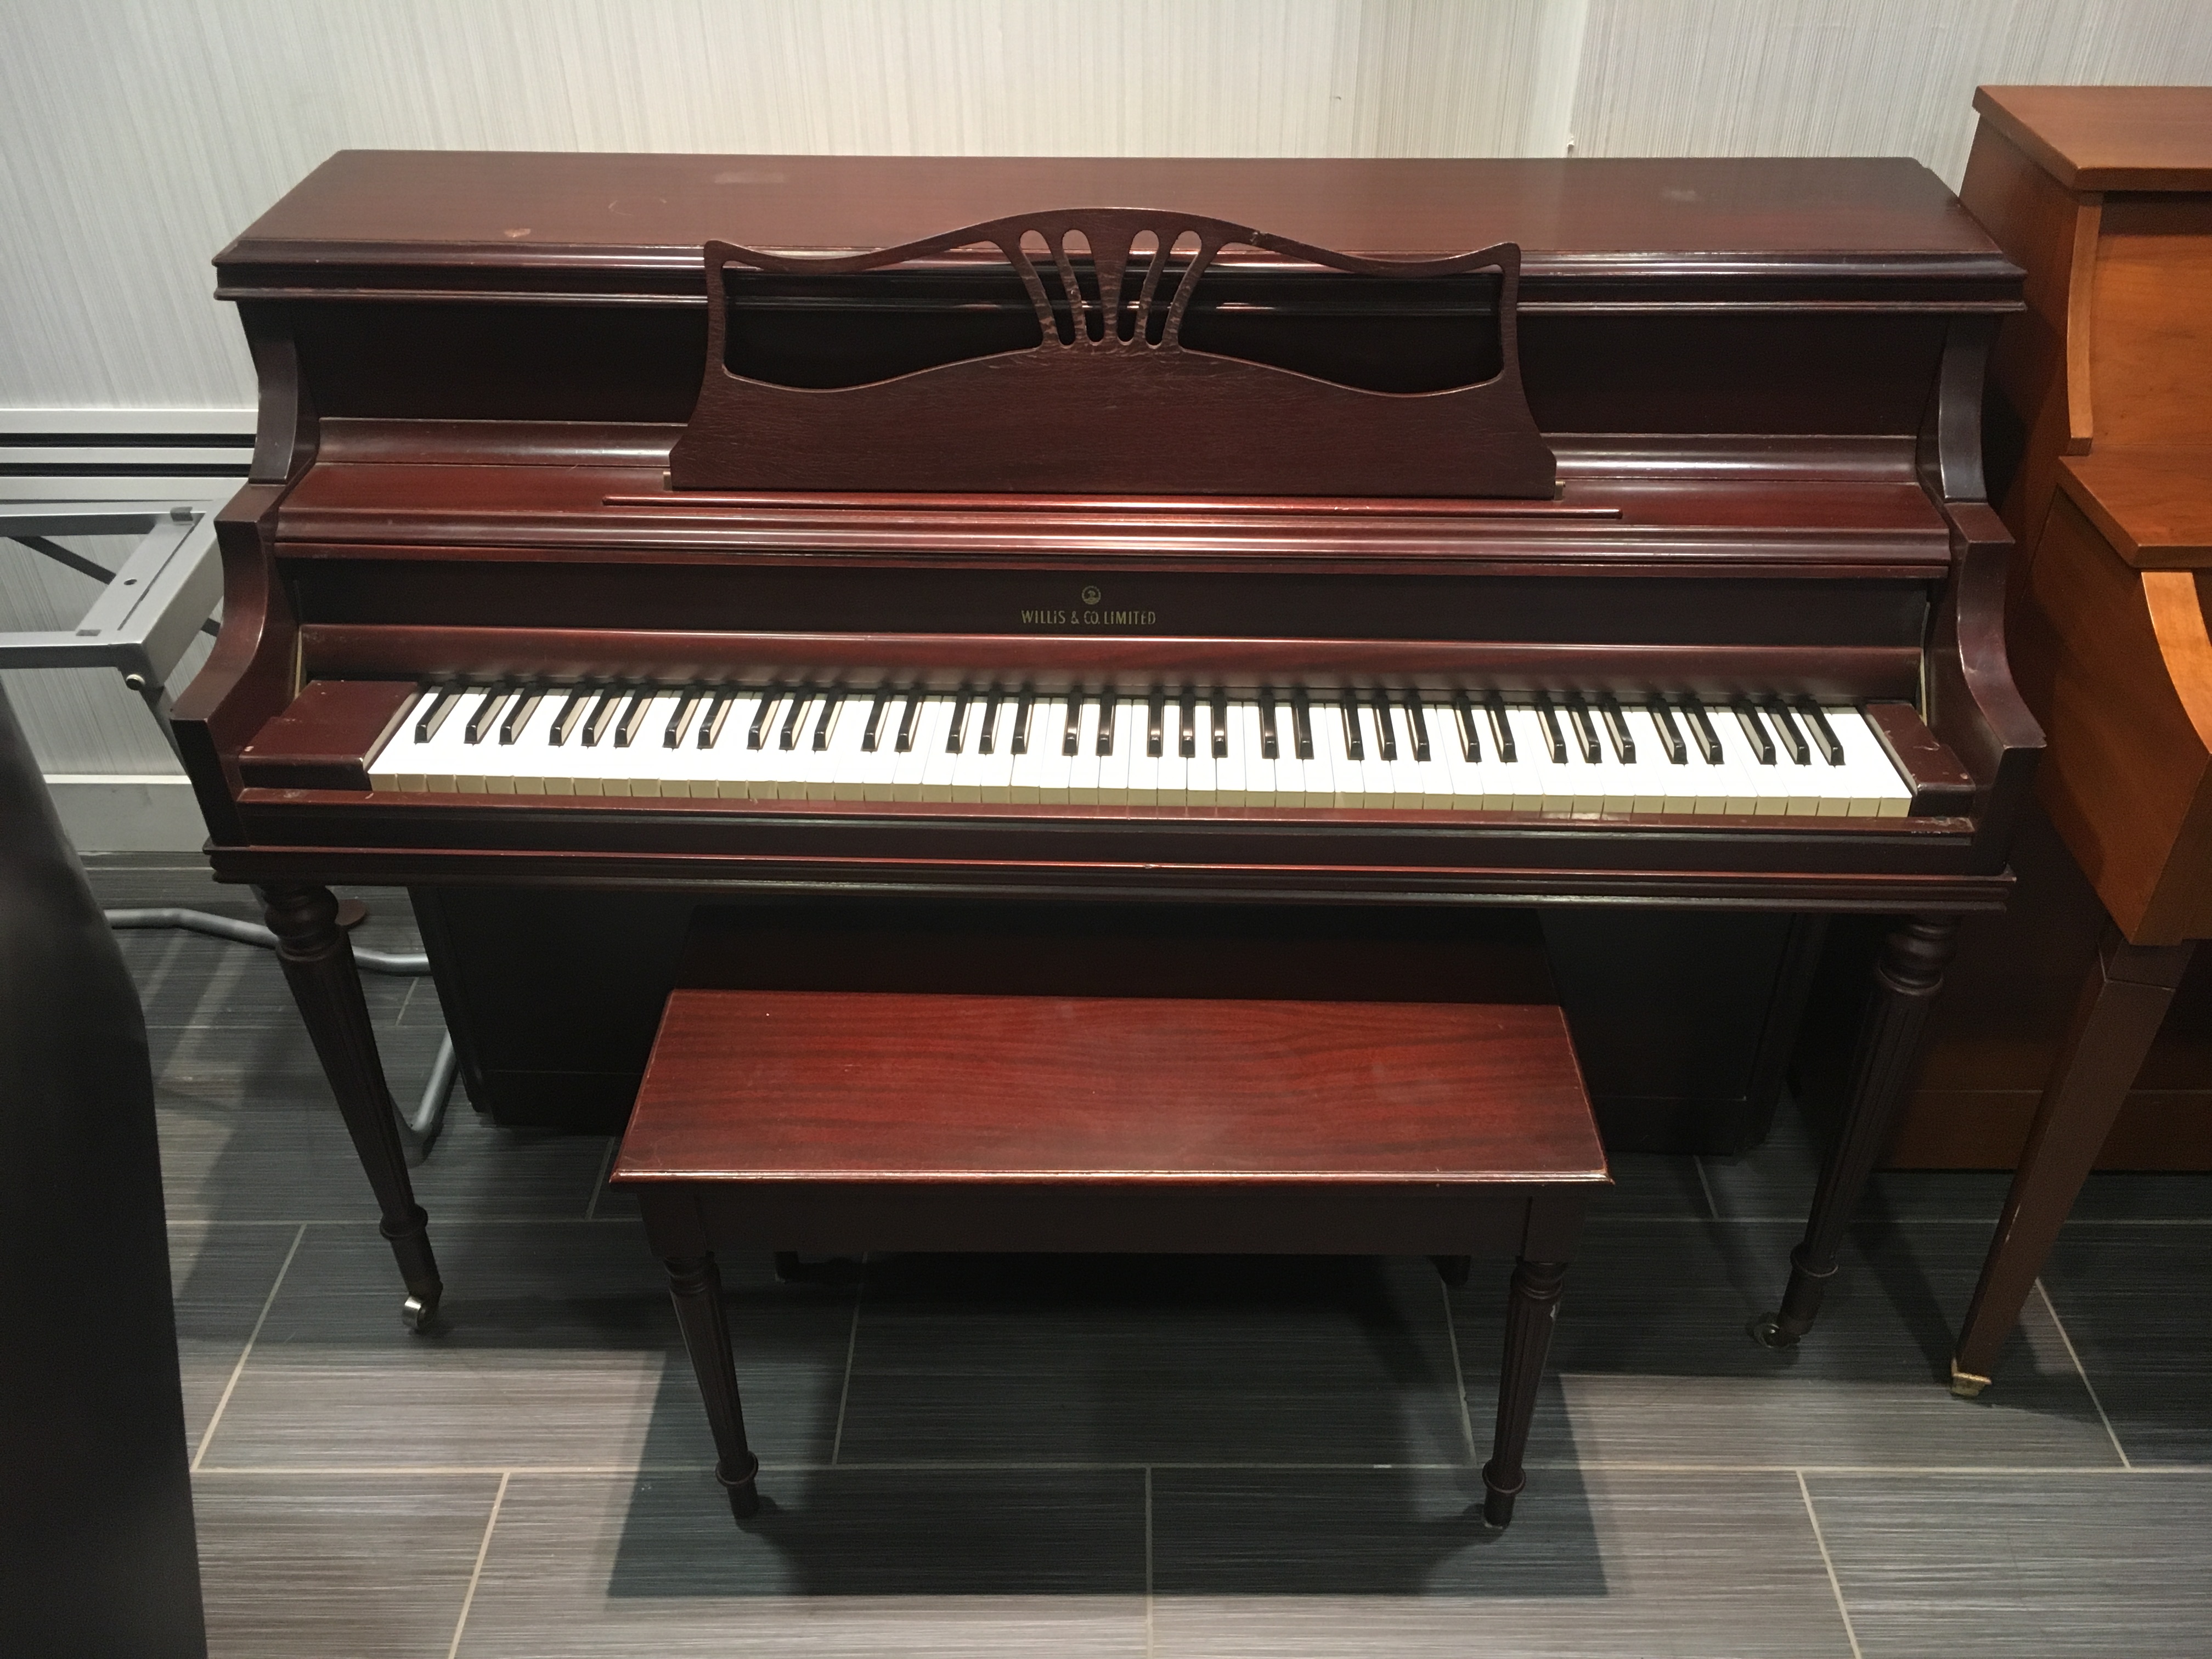 Used Willis & Co Upright Piano